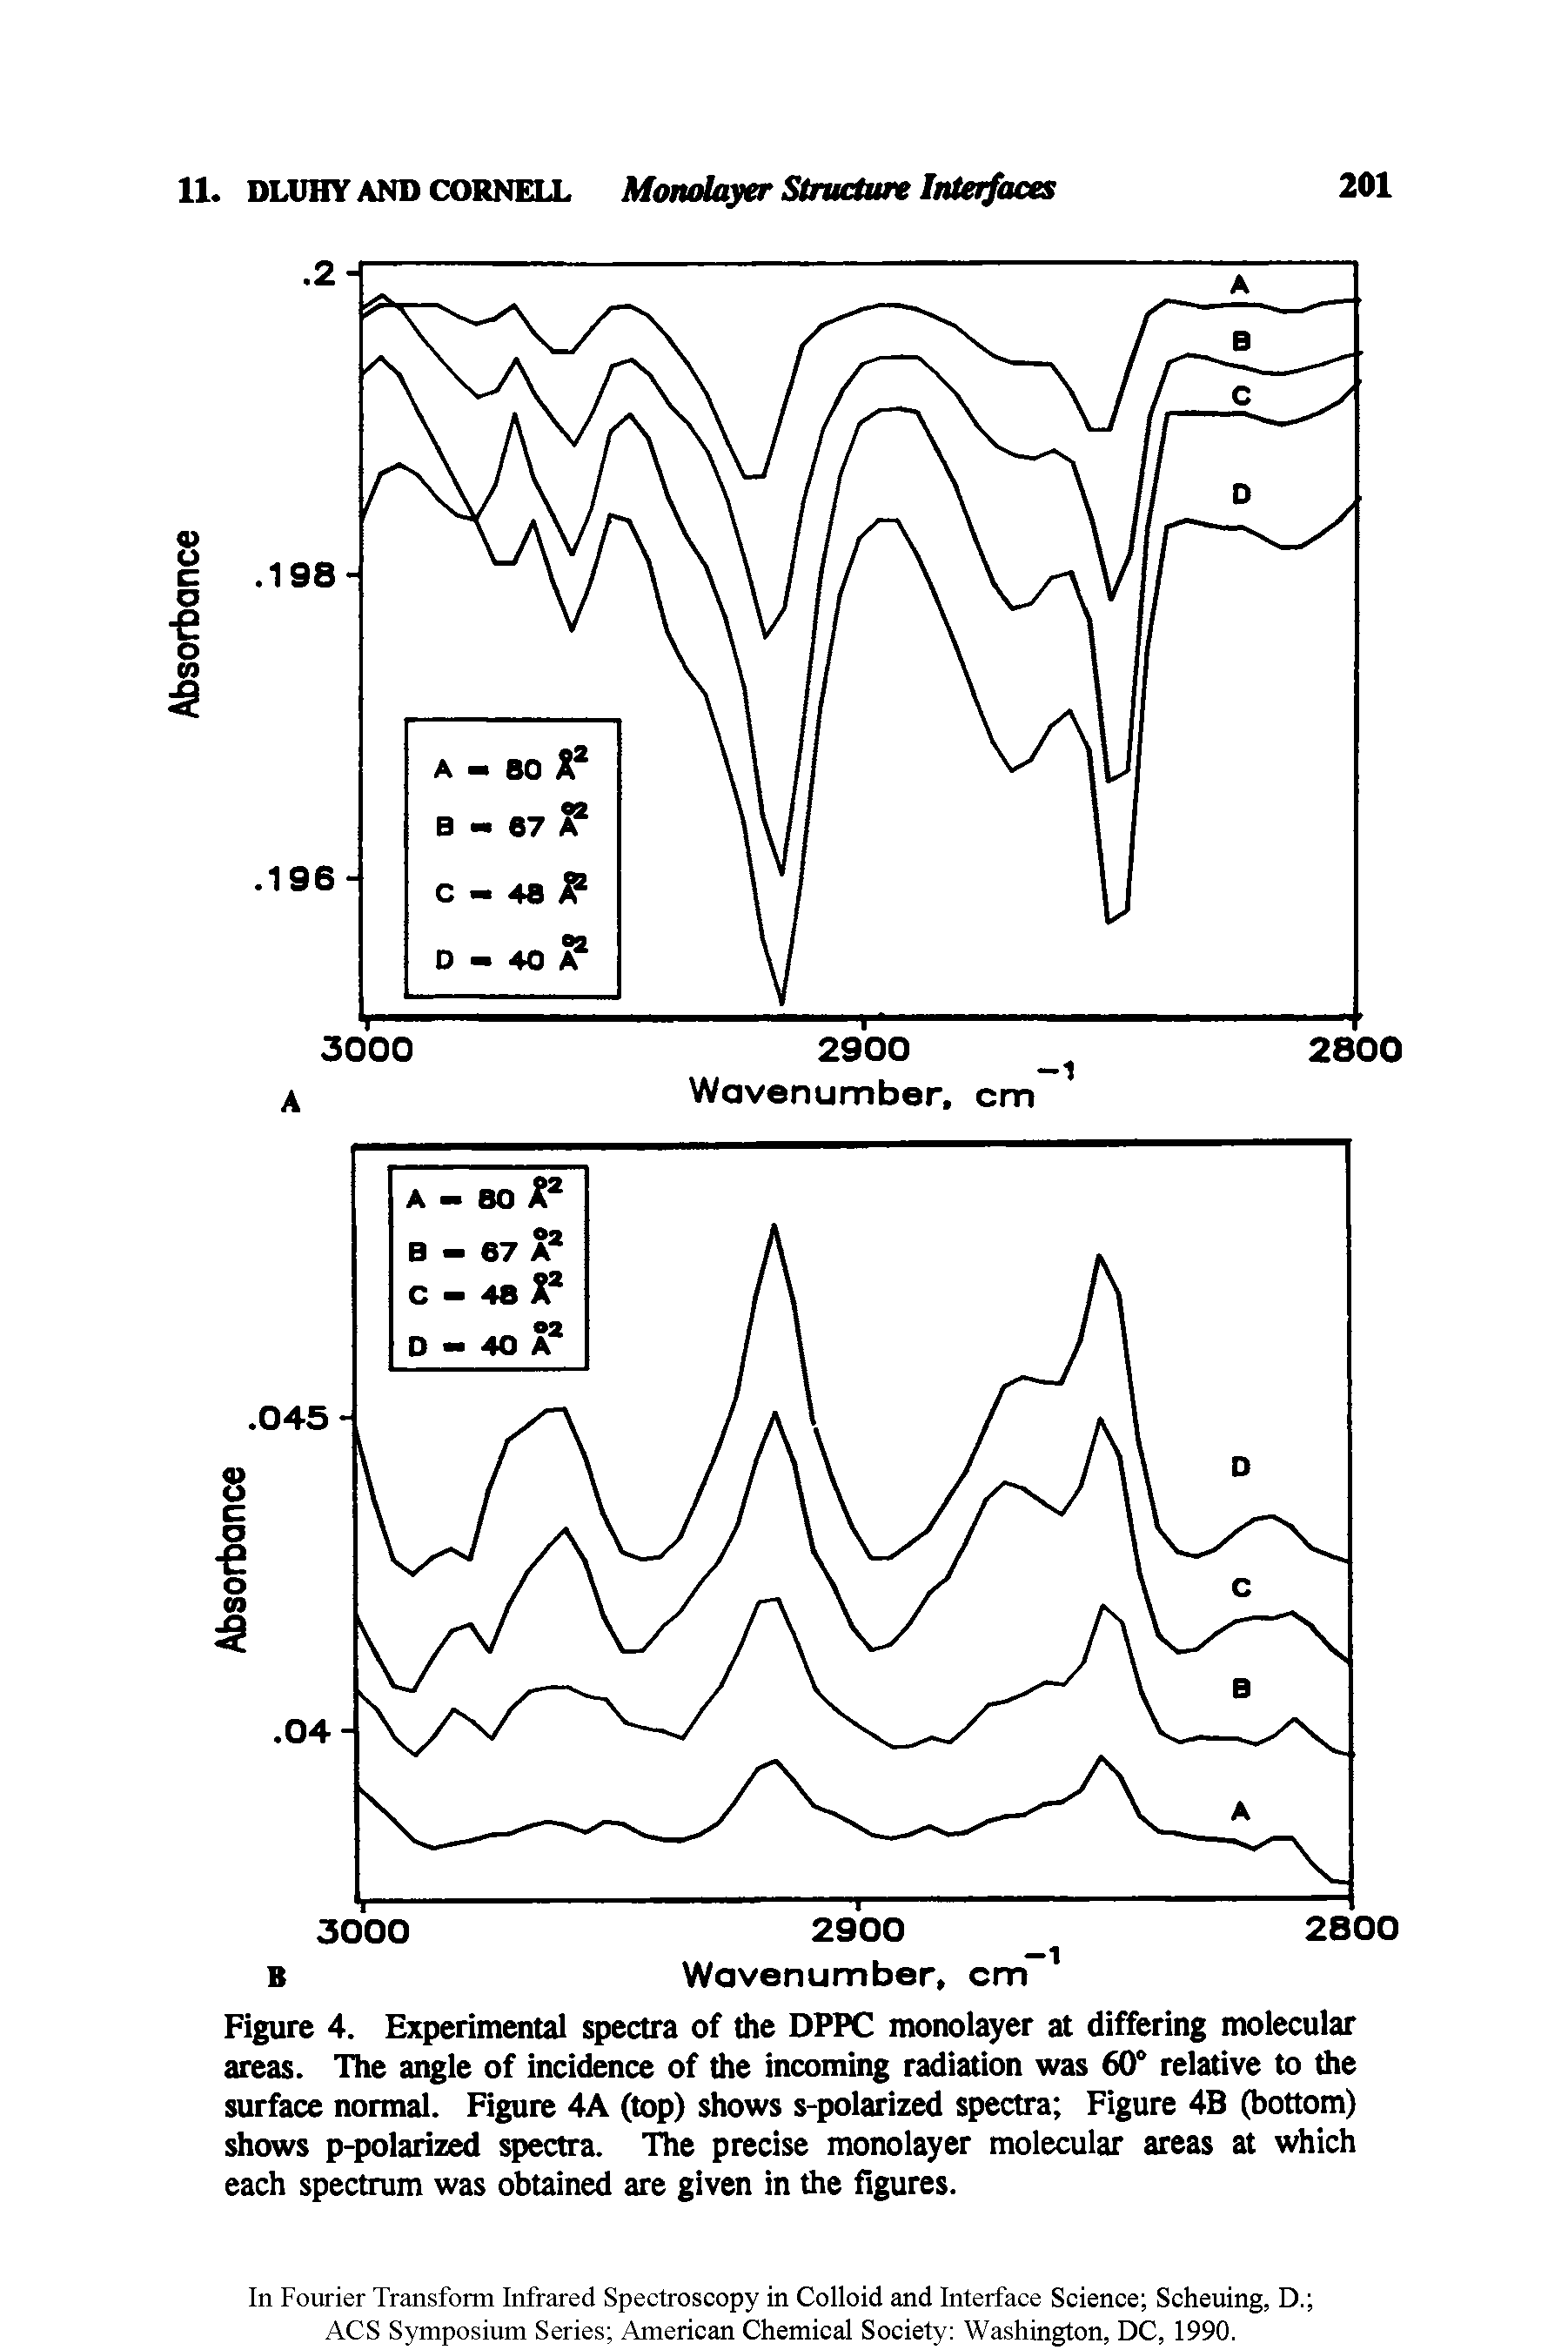 Figure 4. Experimental spectra of the DPPC monolayer at differing molecular areas. The angle of incidence of the incoming radiation was 60° relative to the surface normal. Figure 4A (top) shows s-polarized spectra Figure 4B (bottom) shows p-polarized spectra. The precise monolayer molecular areas at which each spectrum was obtained are given in the figures.